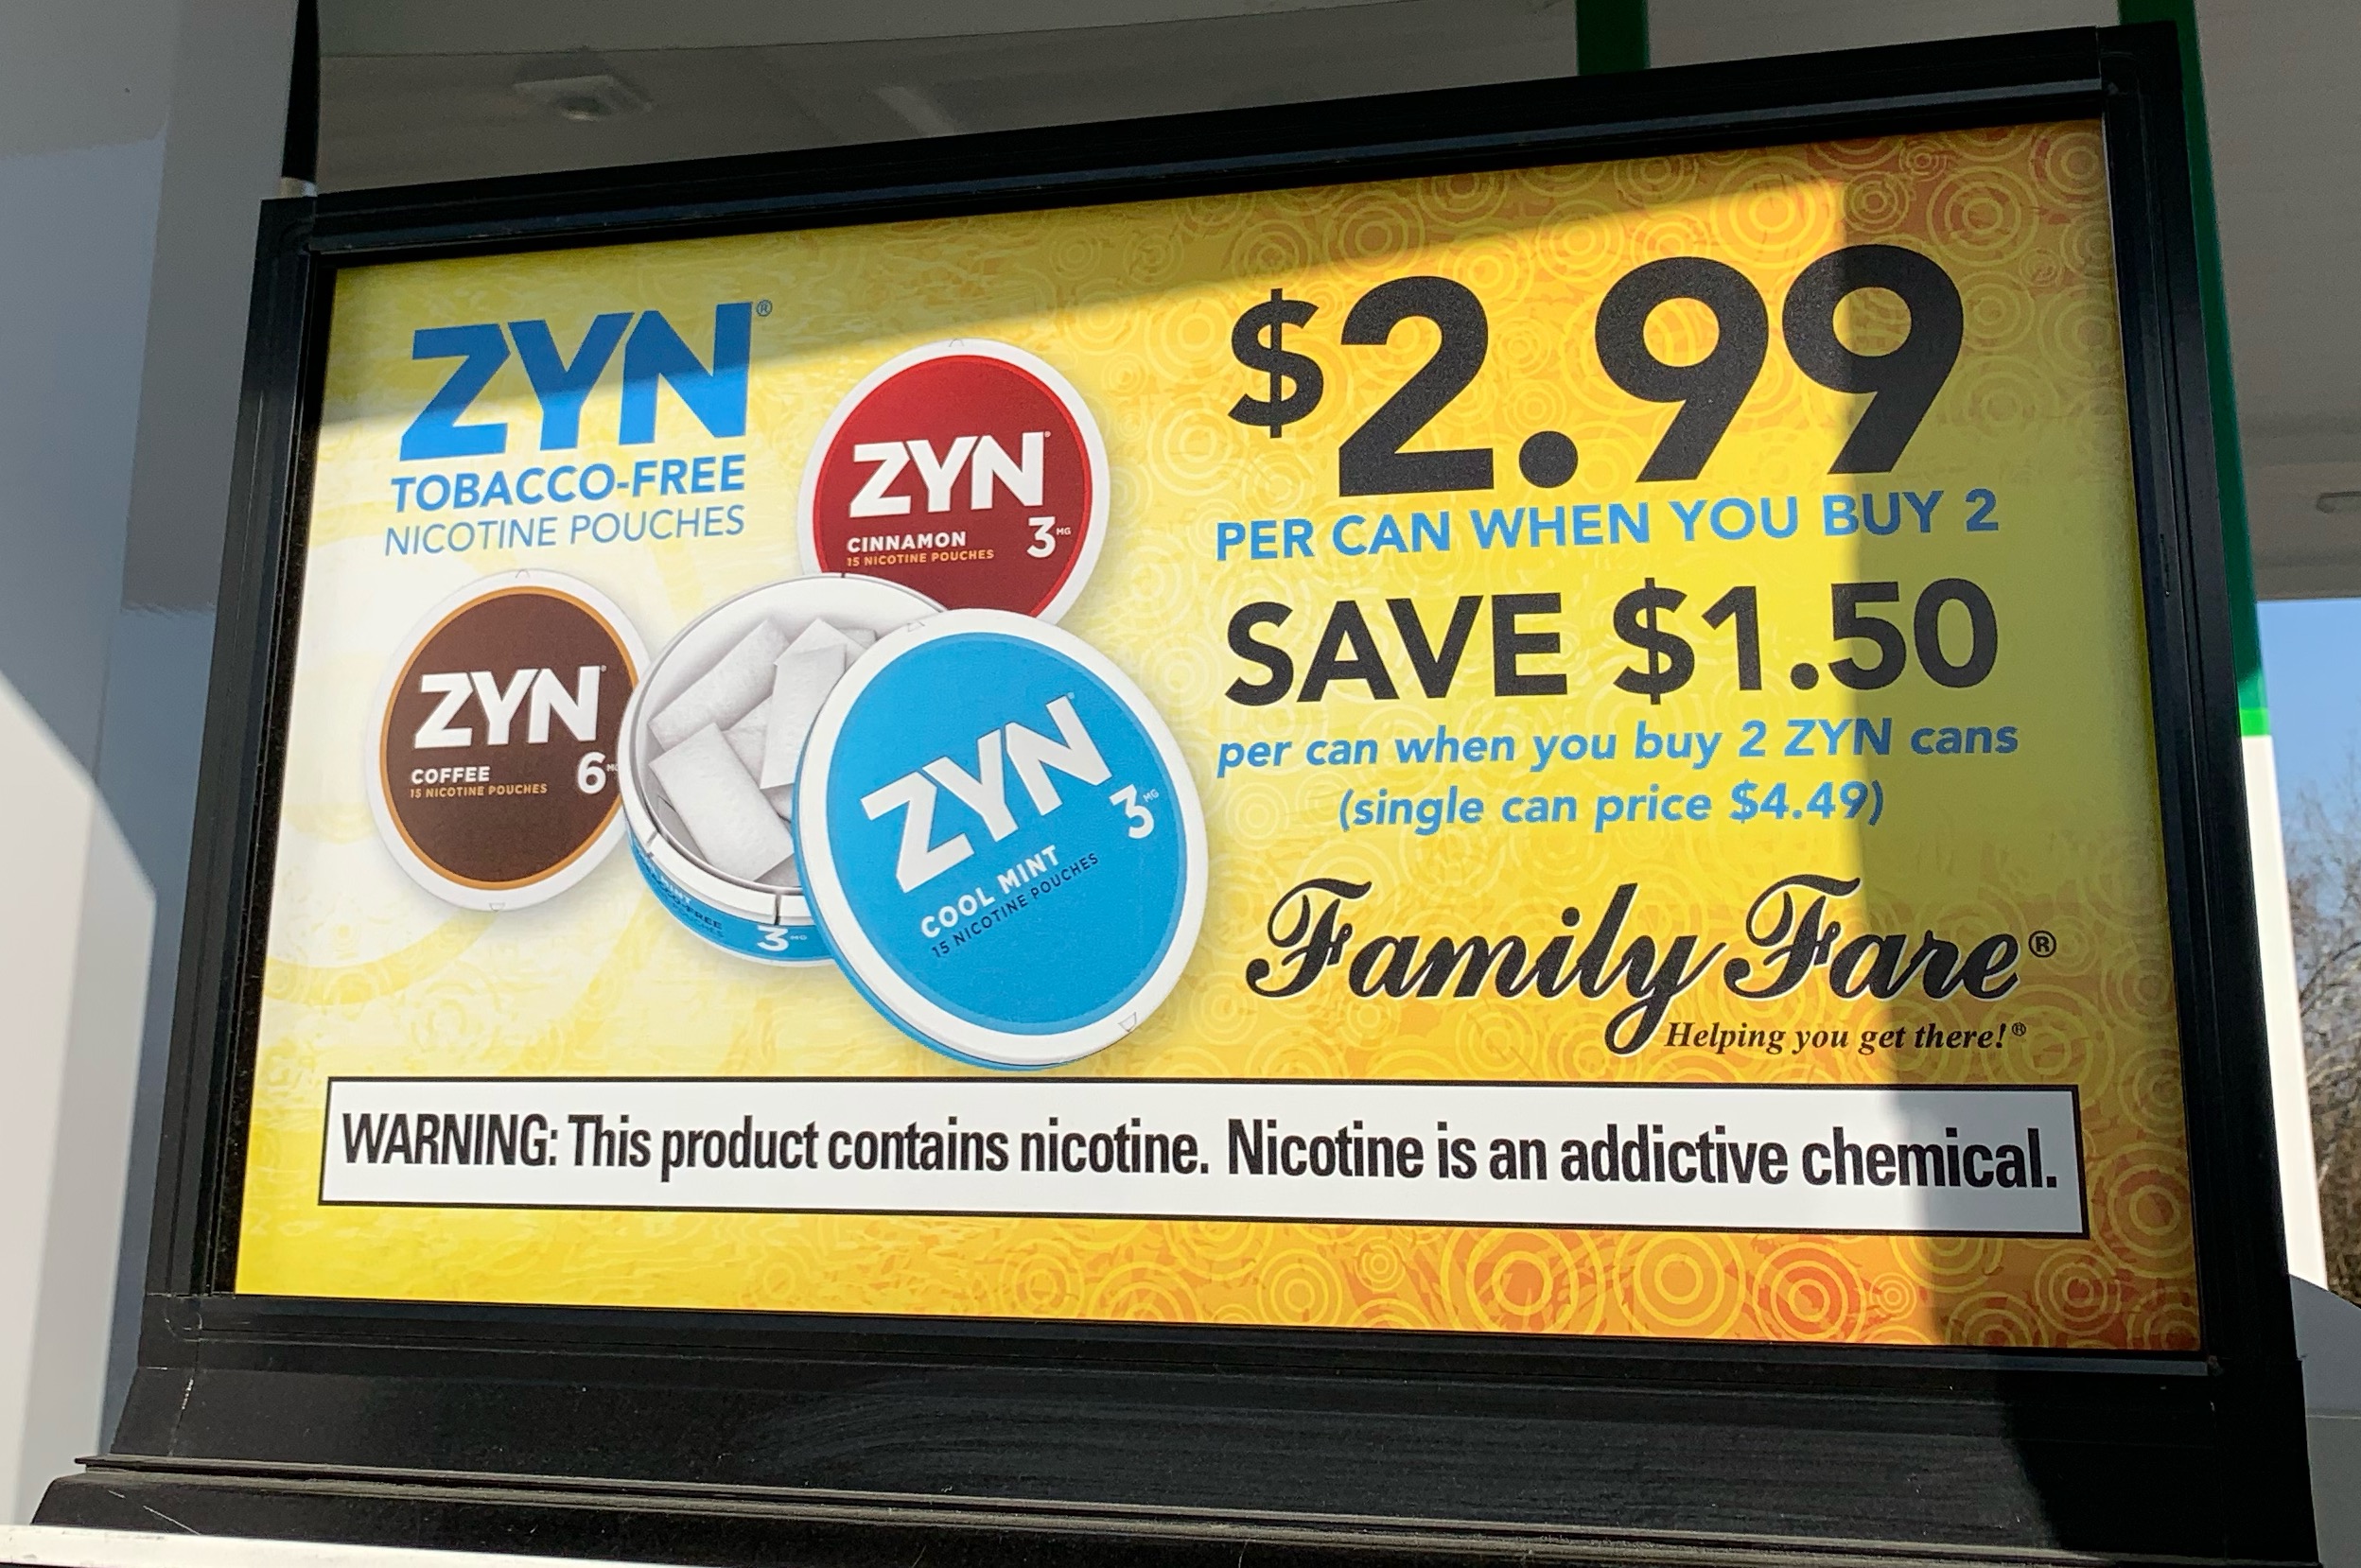 Ad for Zyn 